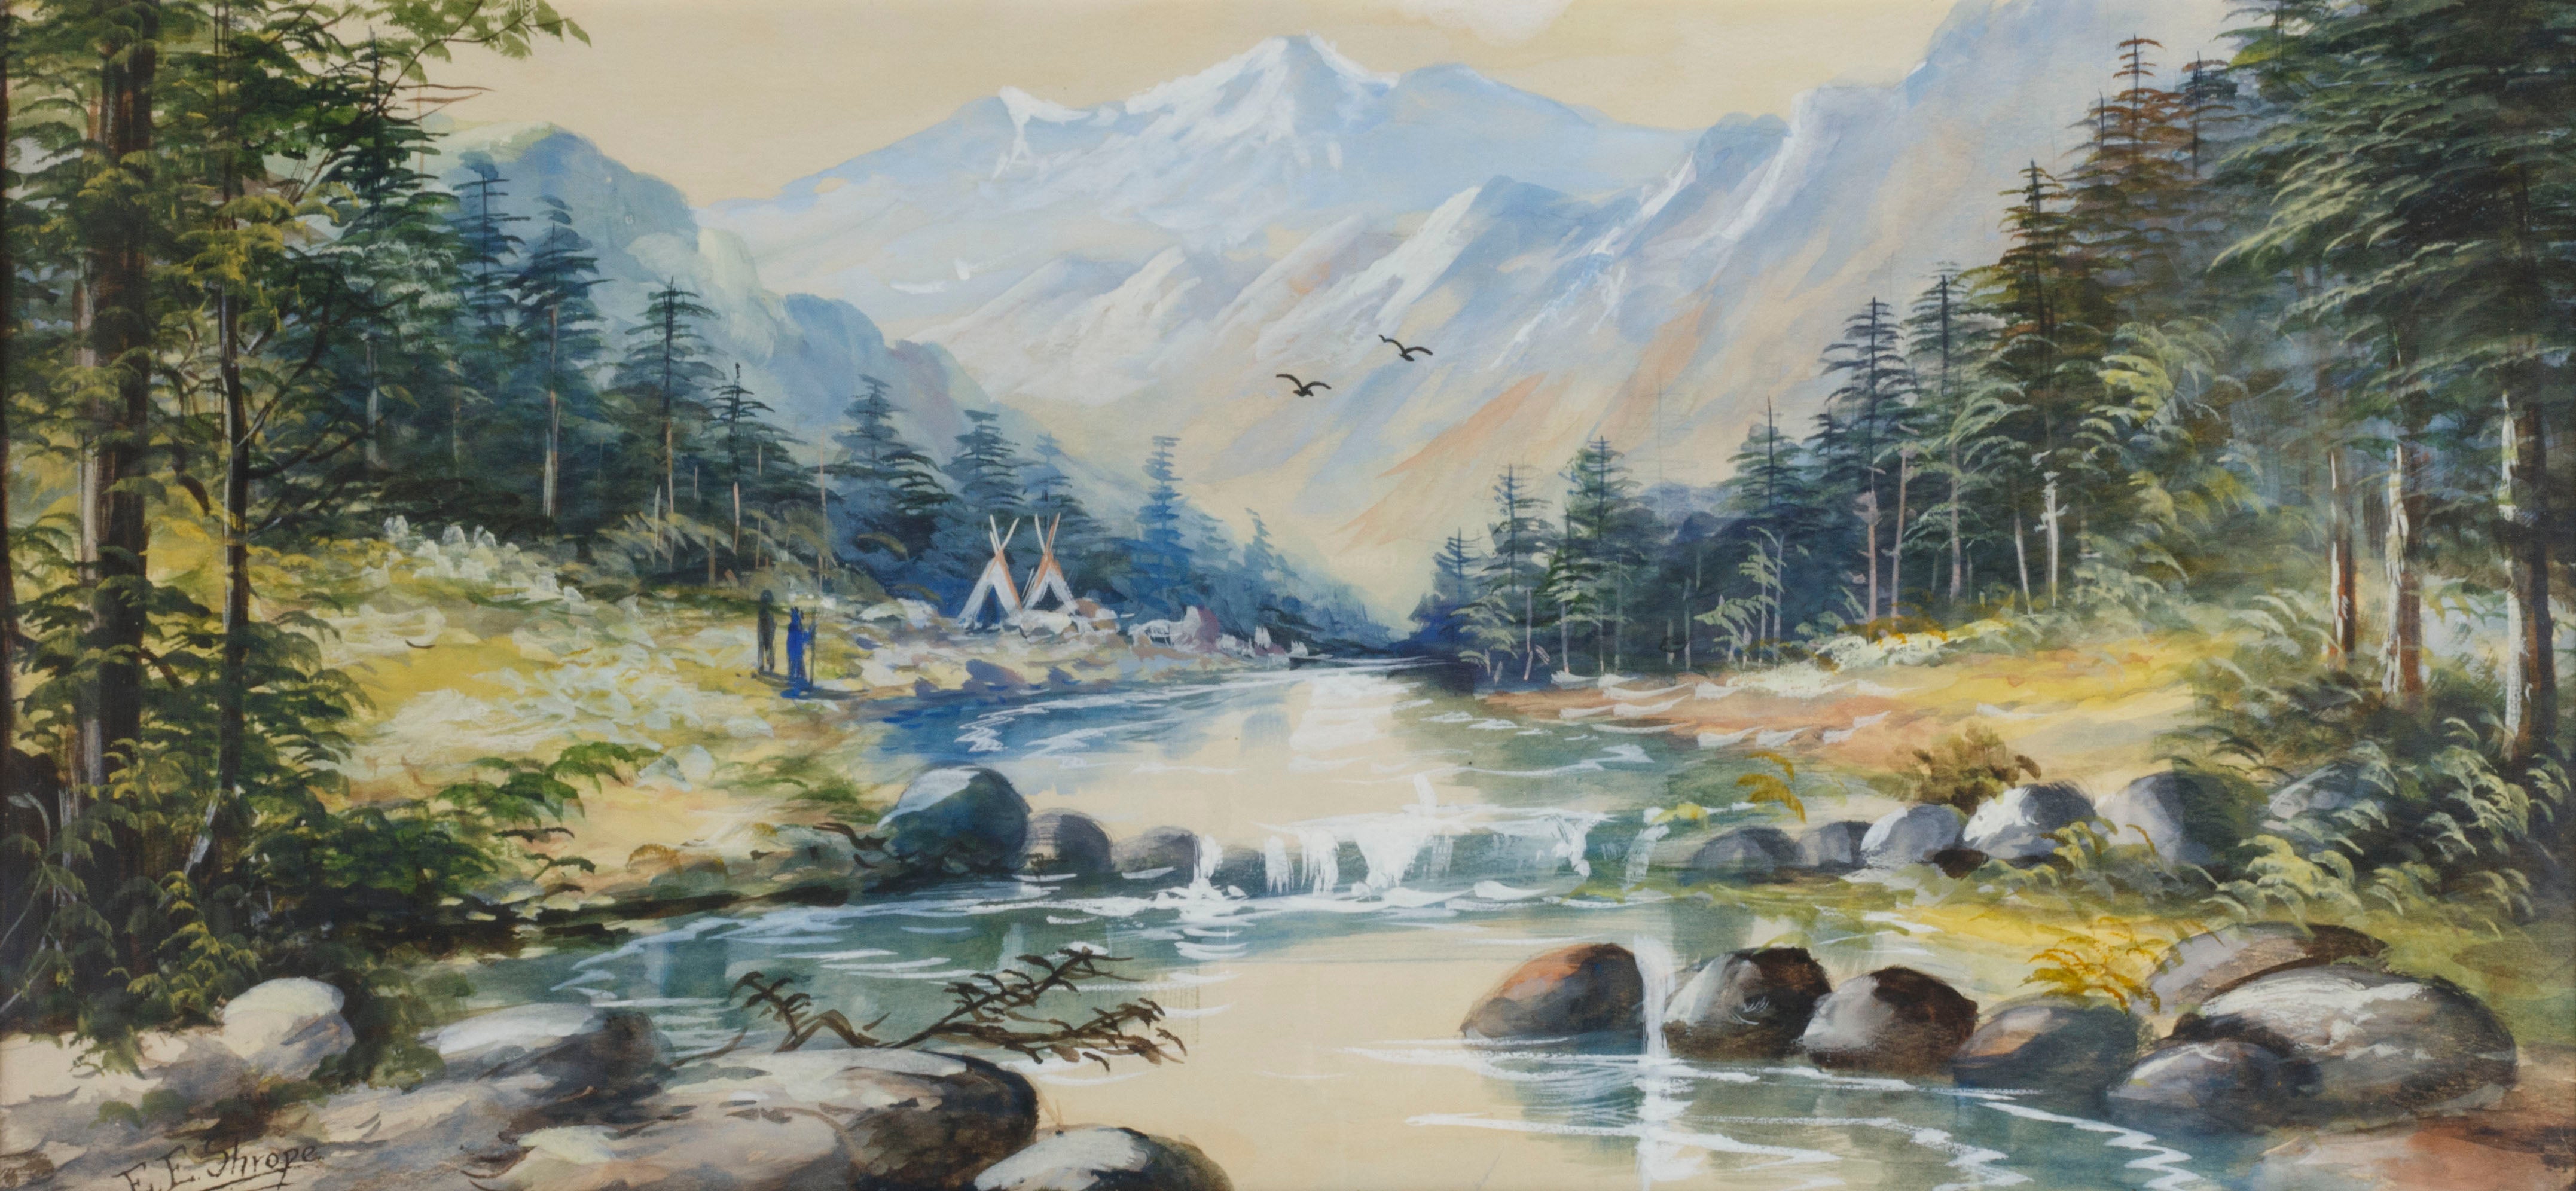 Teepee Camp on River Falls by Edna Shropee, Fine Art, Painting, Native American